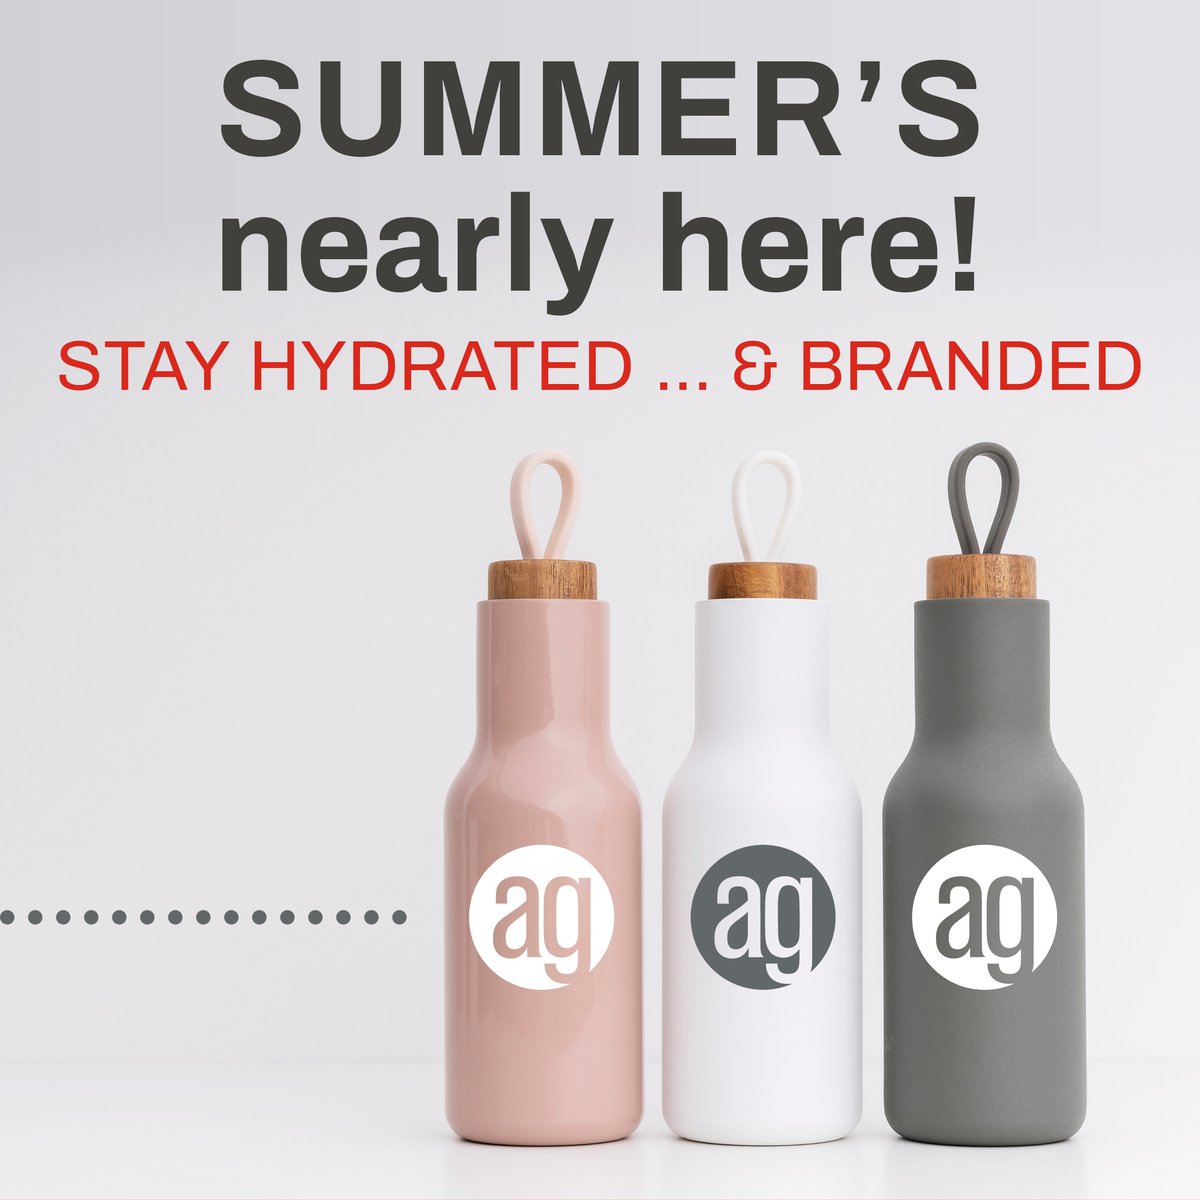 But, all those plastic bottles are about to inundate landfills. Supply your team with reusable bottles, branded with a fun decal! Learn more: b.link/labels-sticker… #EcoFriendly #PromotionalItems #branding #creative #PrintServices